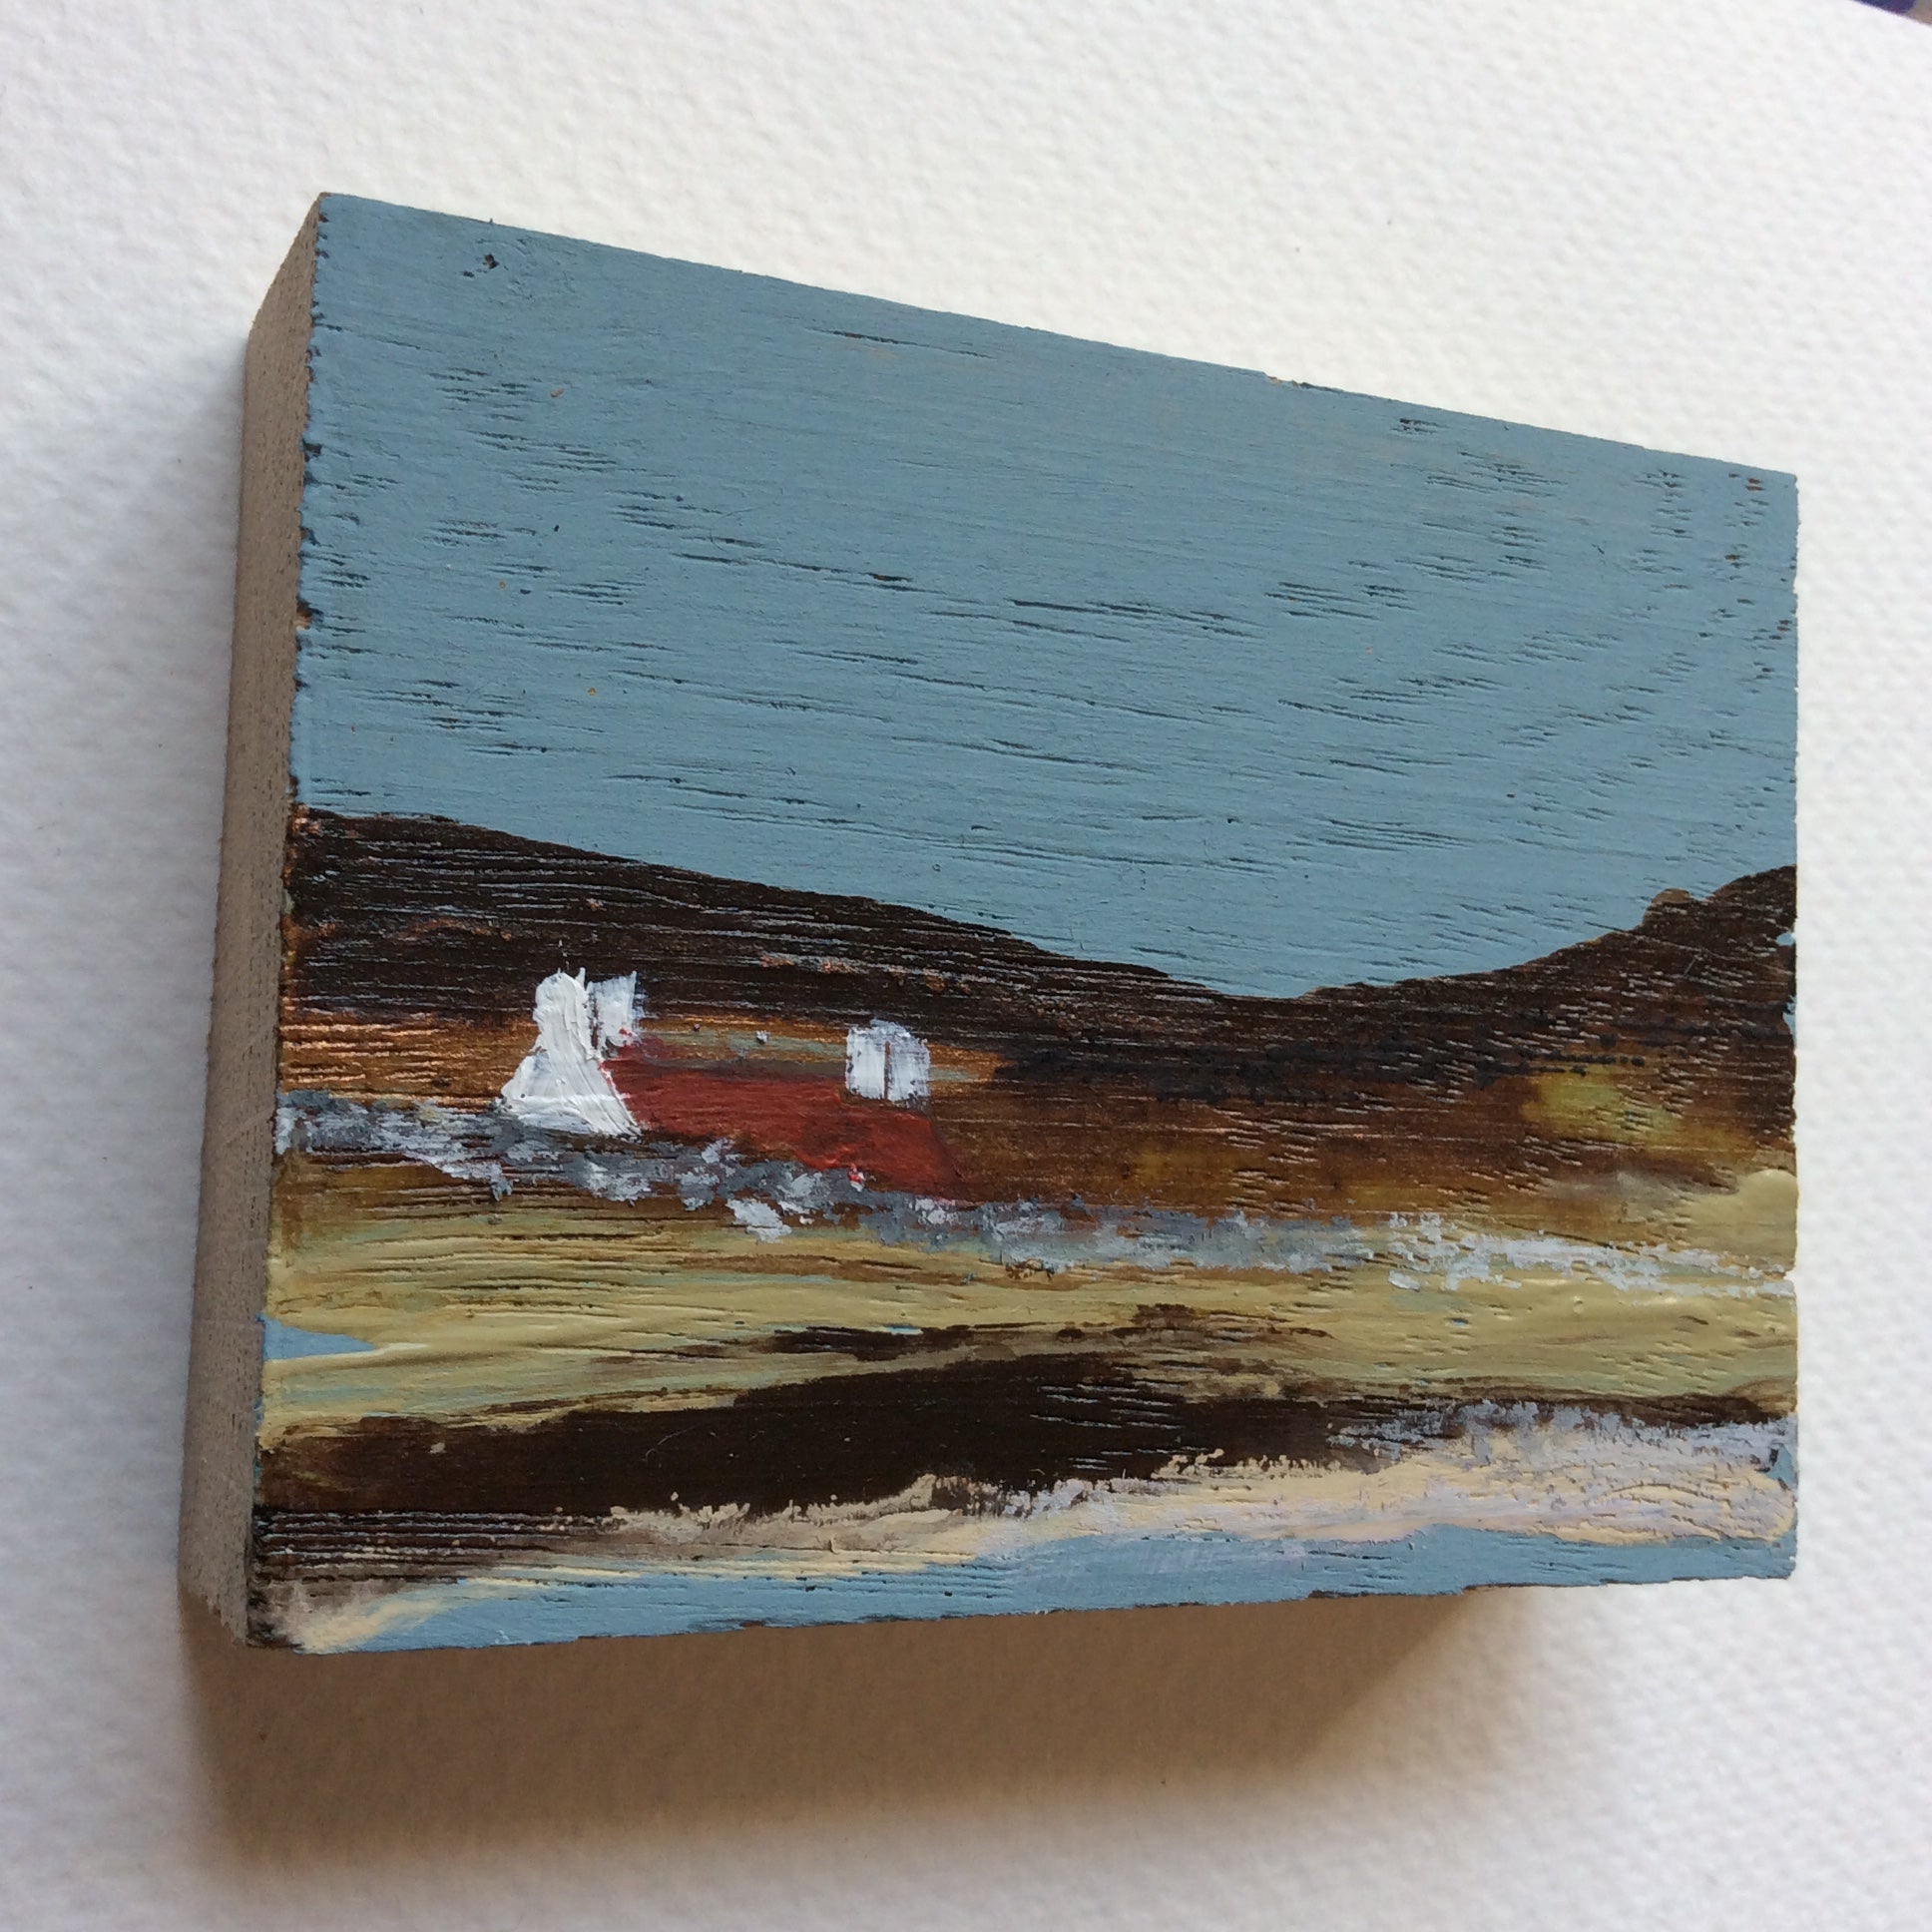 Miniature Mixed Media Art on wood By Louise O'Hara - "An early spring evening”